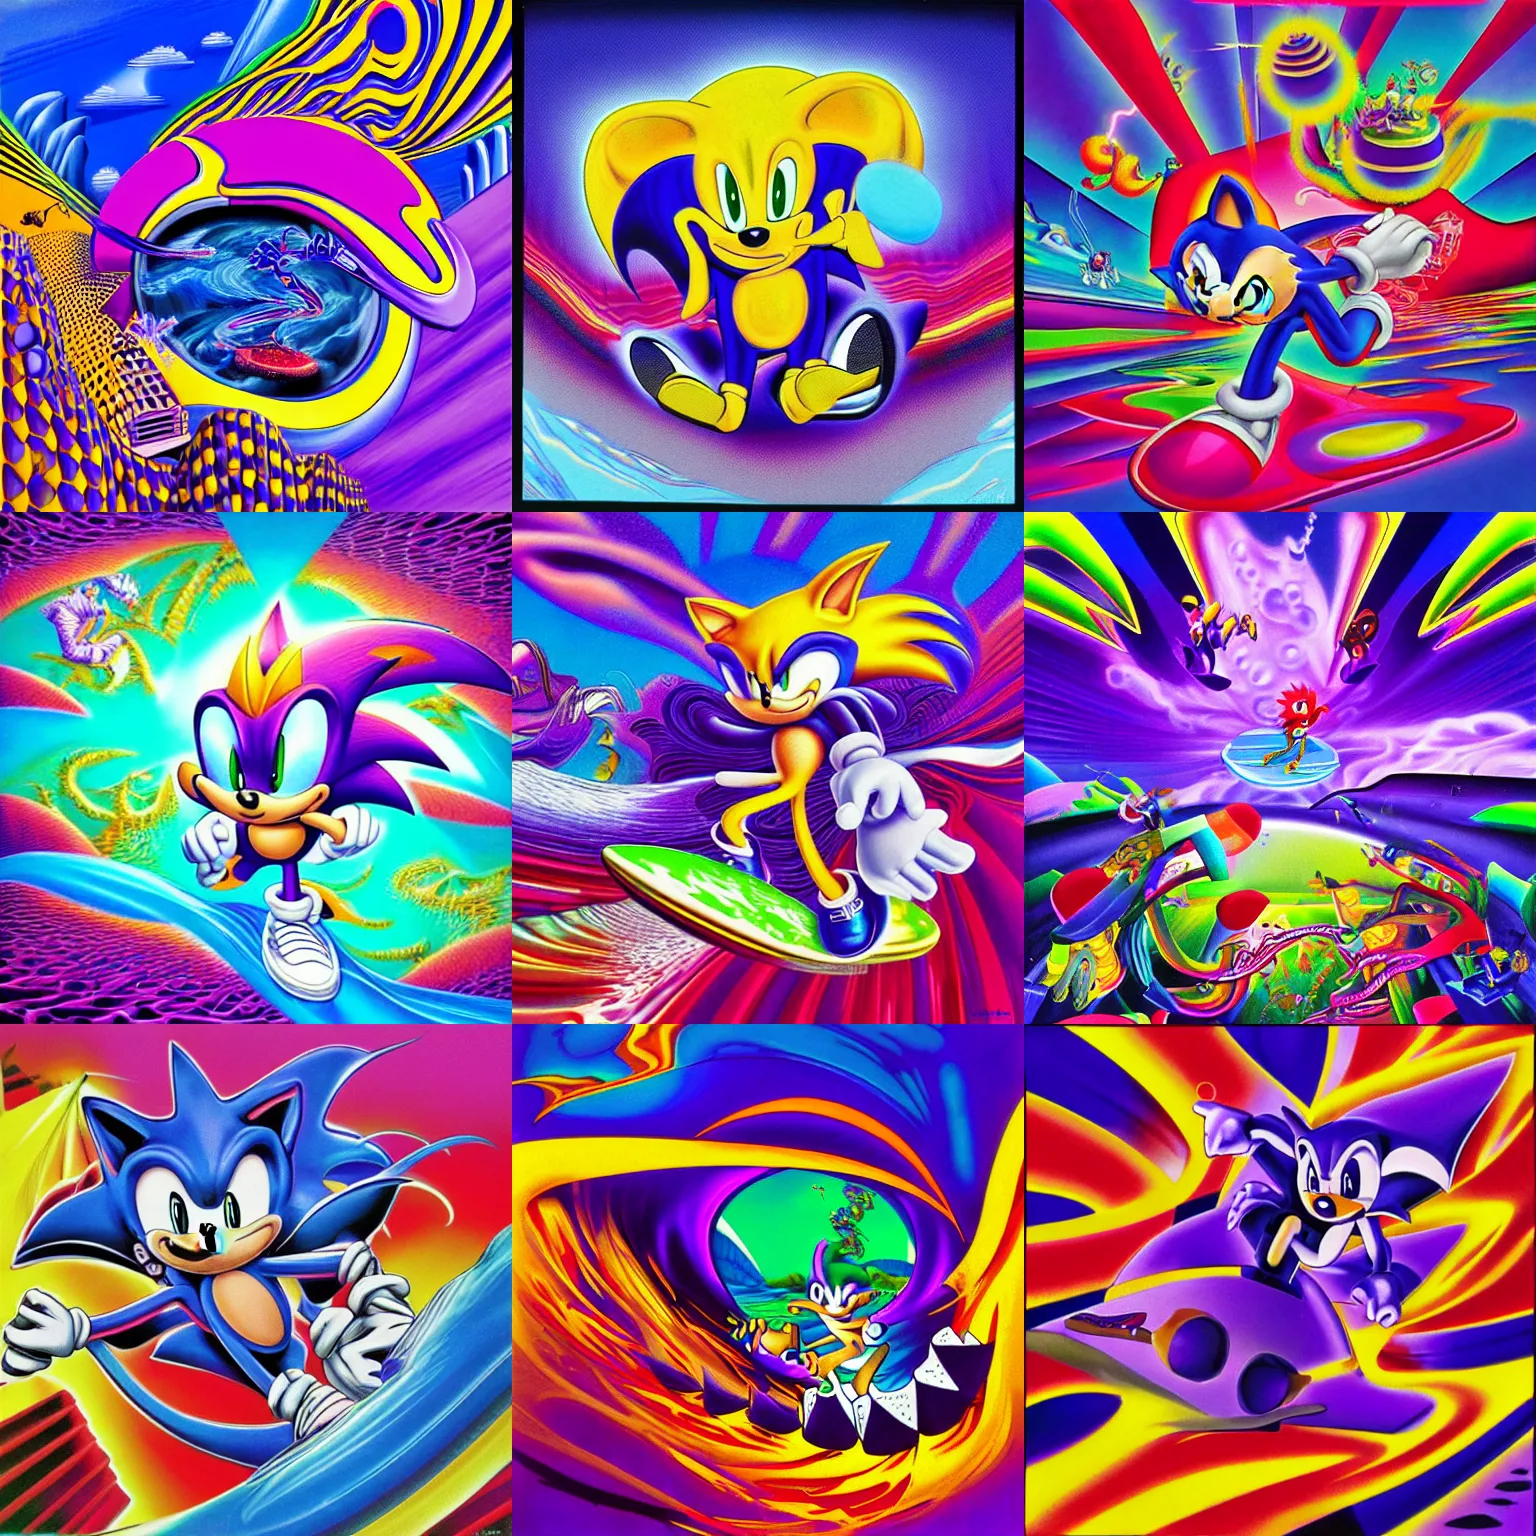 Image similar to surreal, sharp, detailed professional, high quality airbrush art mgmt album cover of a liquid dissolving airbrush art lsd dmt sonic the hedgehog surfing through cyberspace, purple checkerboard background, 1 9 9 0 s 1 9 9 2 sega genesis video game album cover